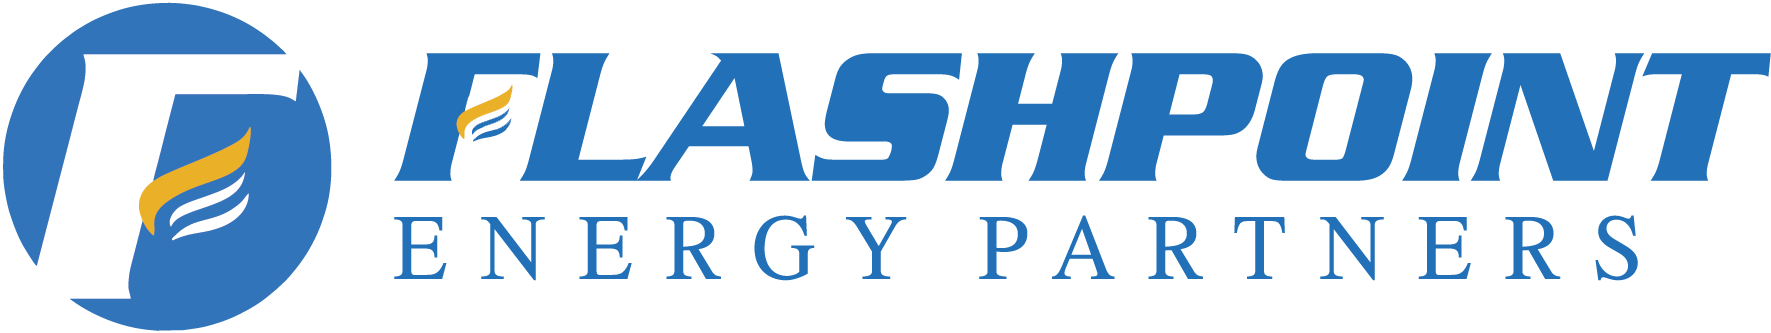 Flashpoint Energy Partners